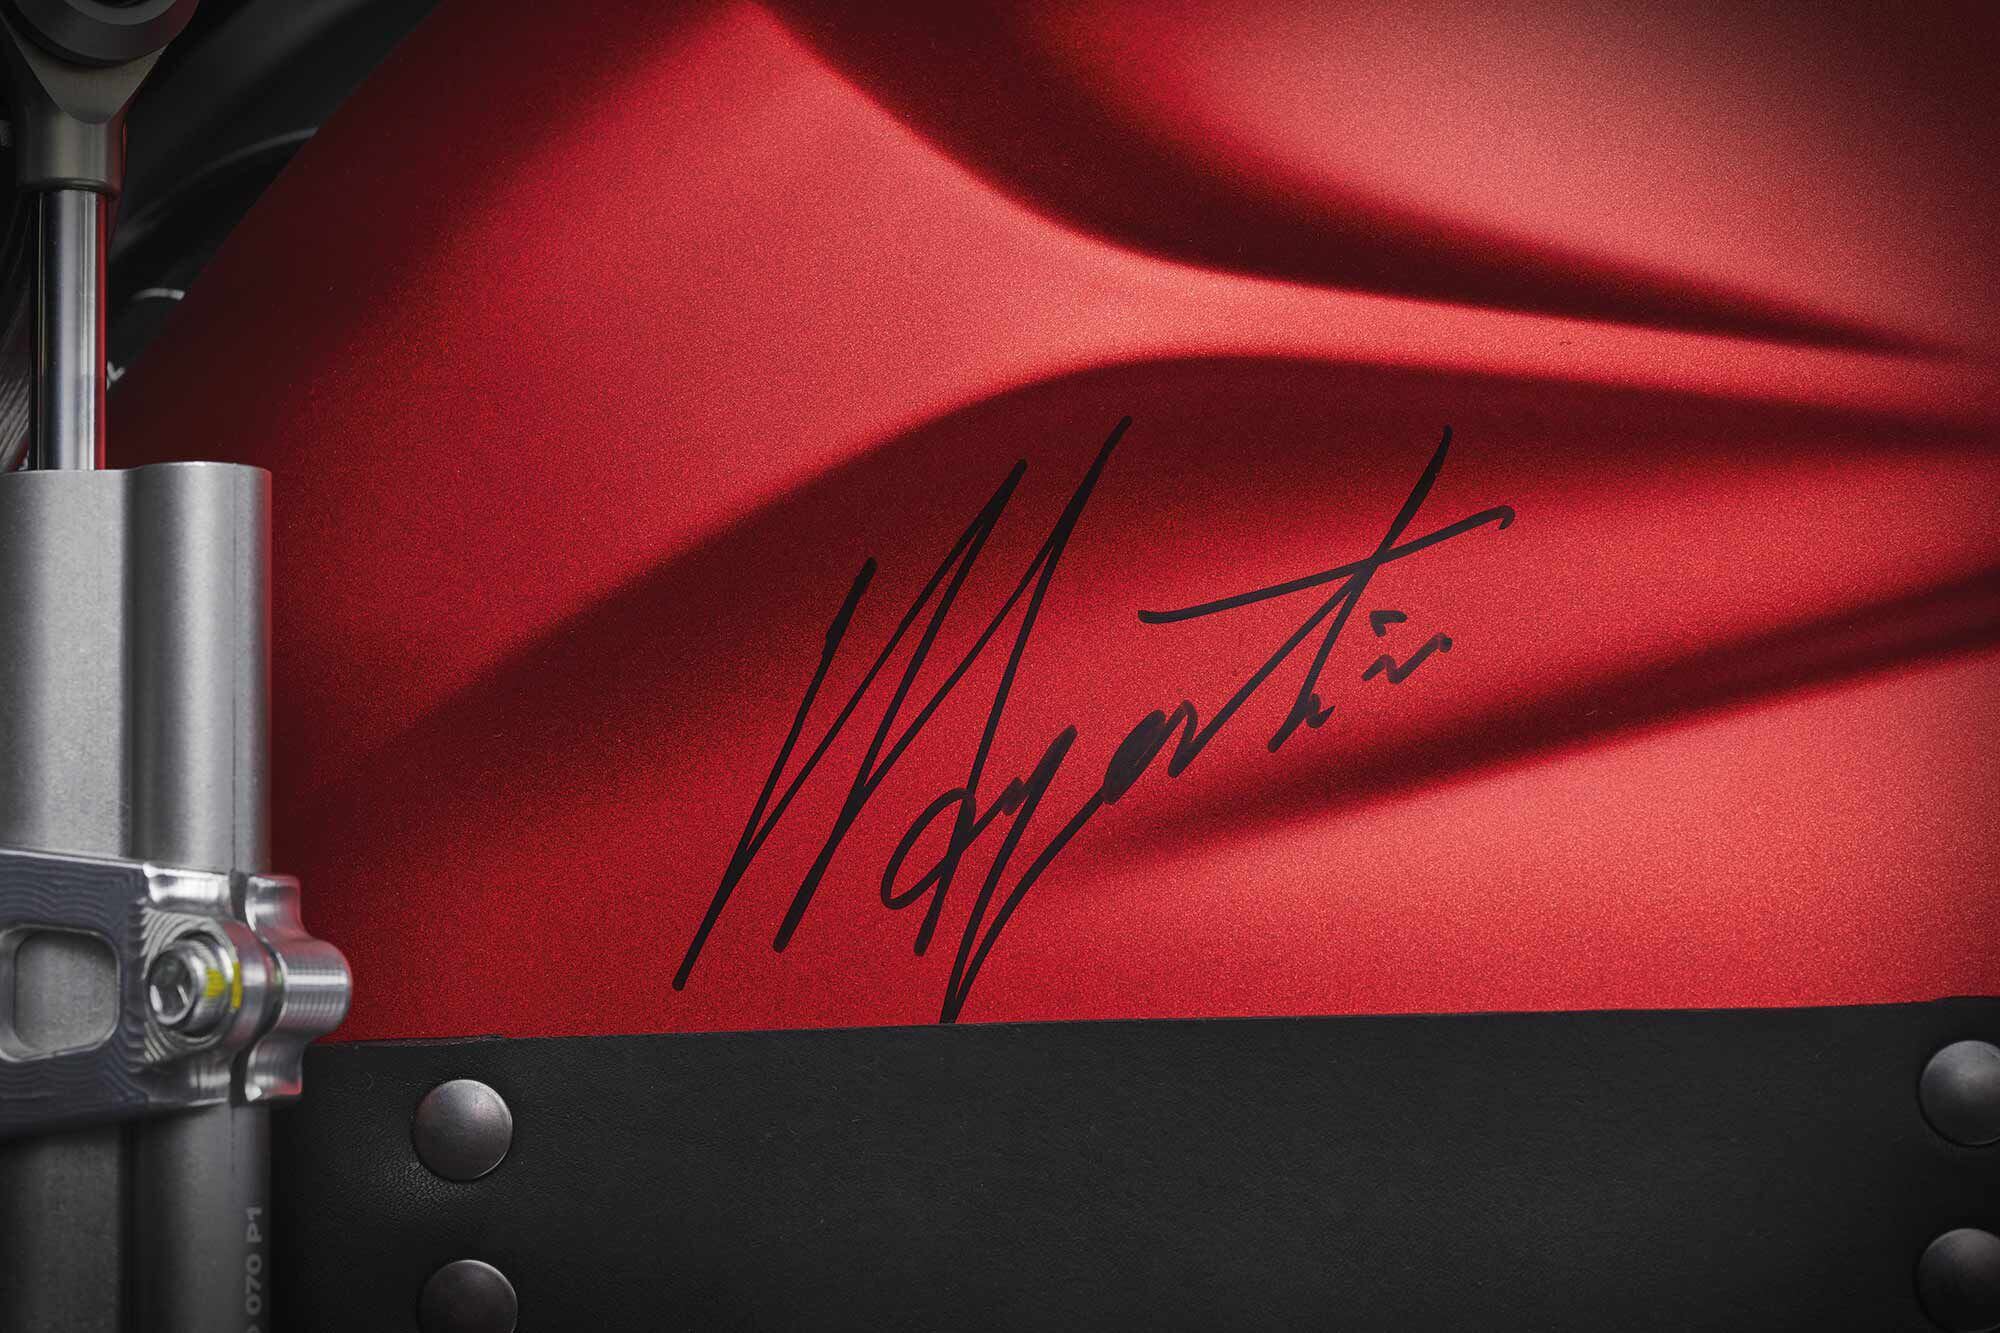 Each bike is numbered, and features Agostini’s signature.